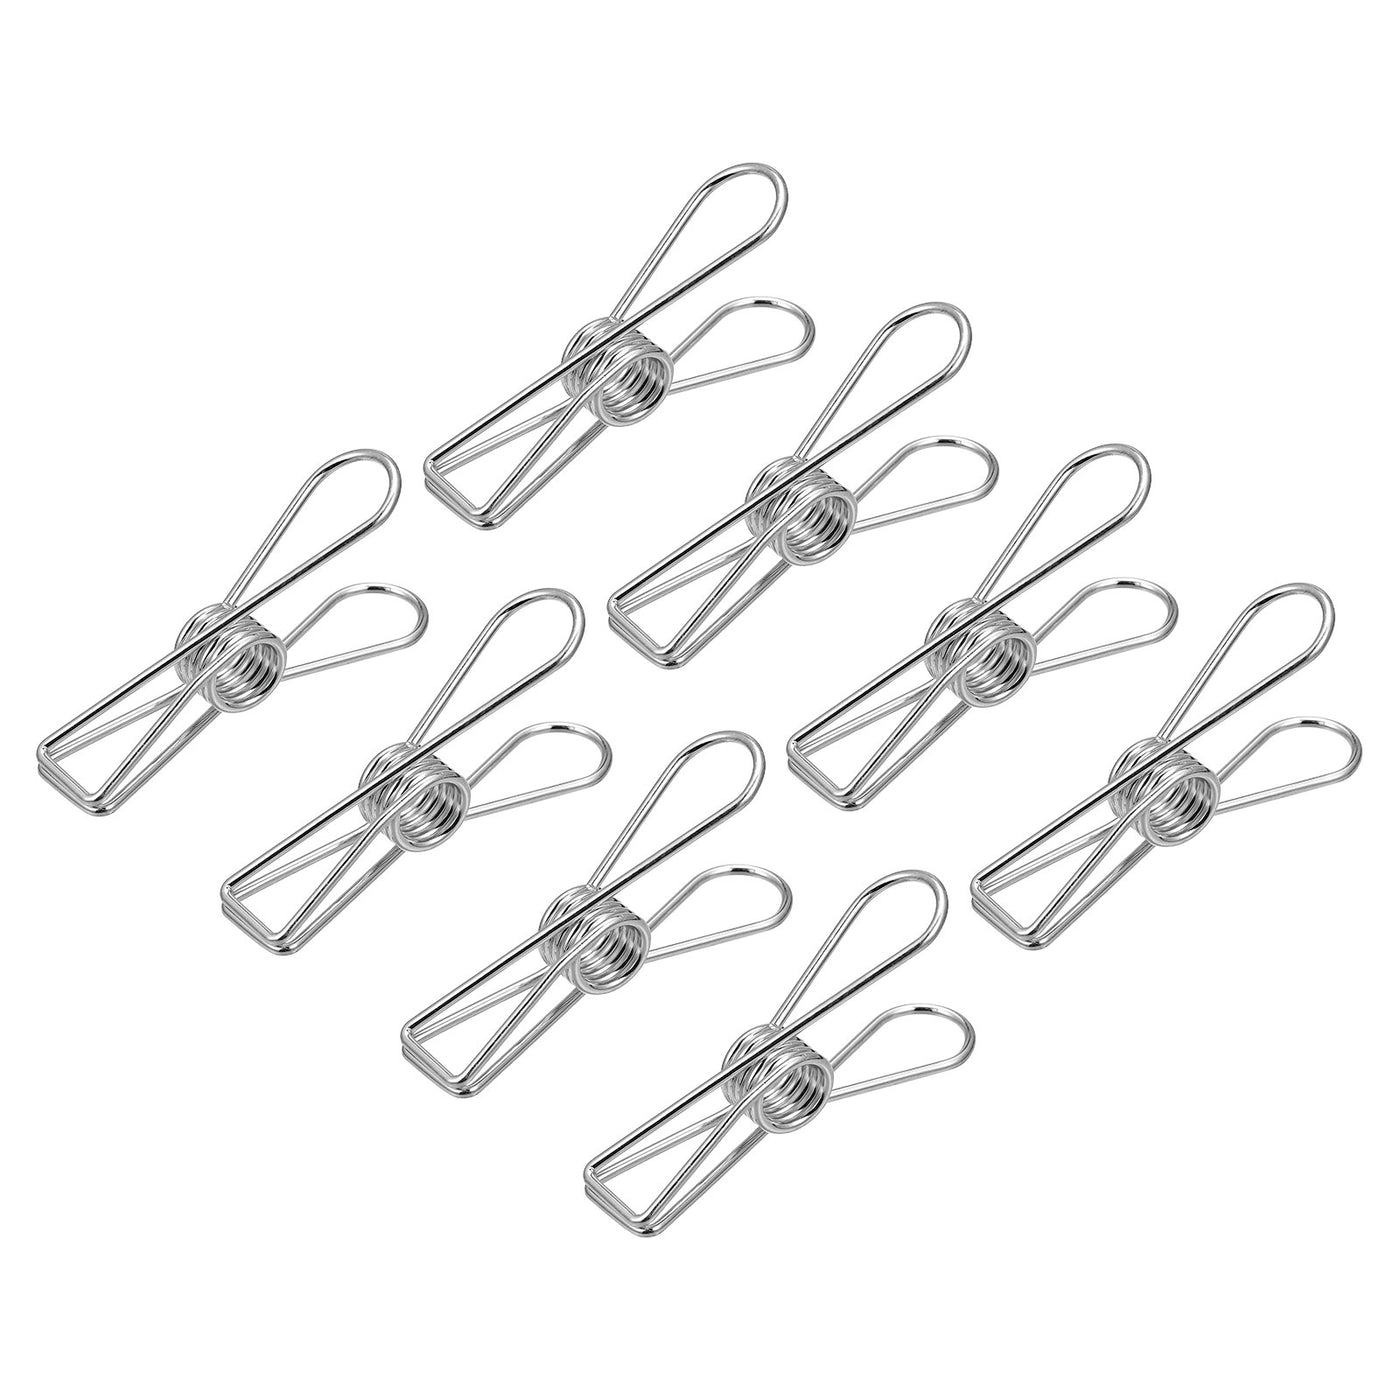 uxcell Uxcell Tablecloth Clips, 70mm Carbon Steel Clamps for Fix Table Cloth, Silver 8 Pcs